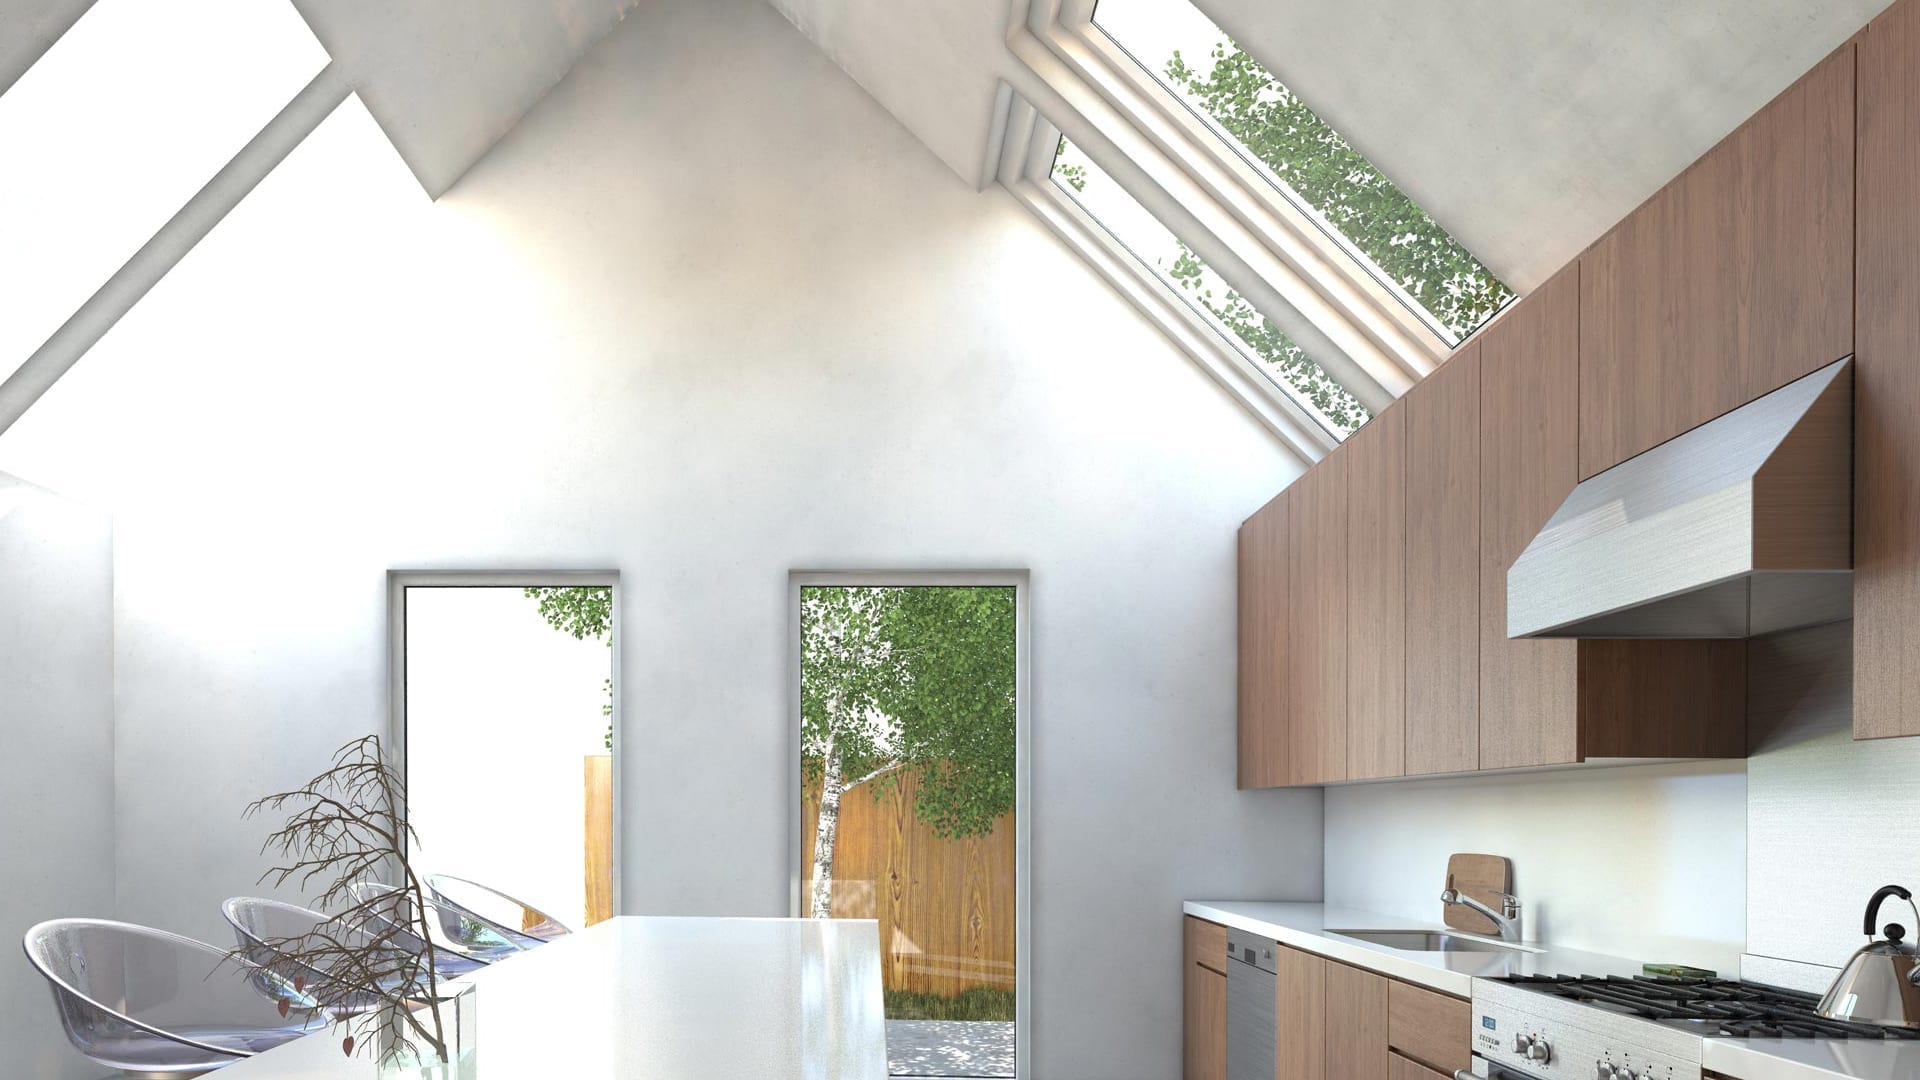 home's kitchen with two skylights in the ceiling